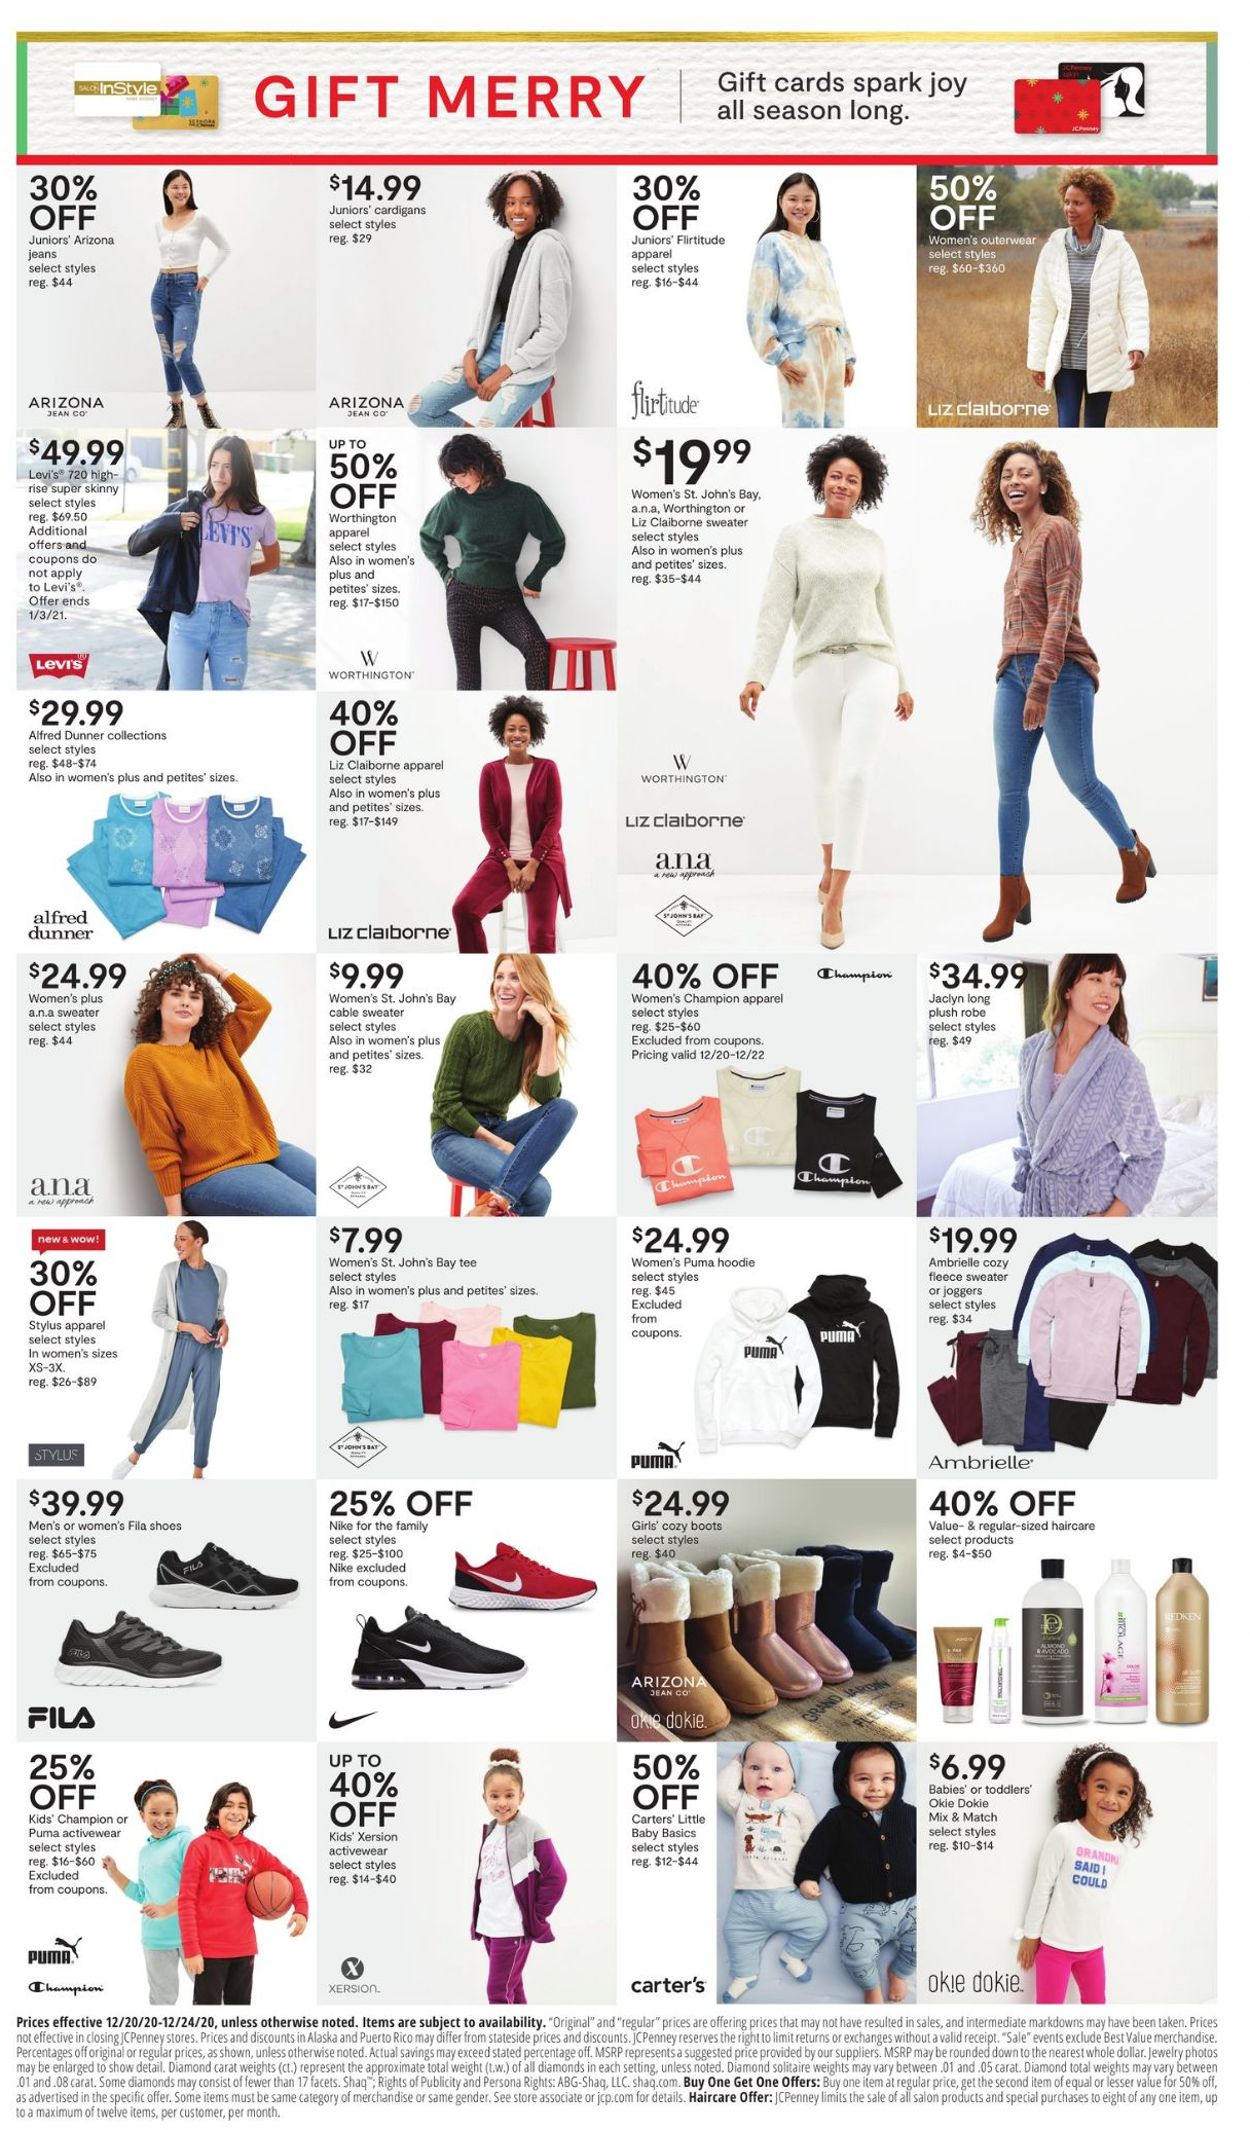 JCPenney Wrap Up The Joy Sale 2020 Current weekly ad 12/20 - 12/24/2020 ...